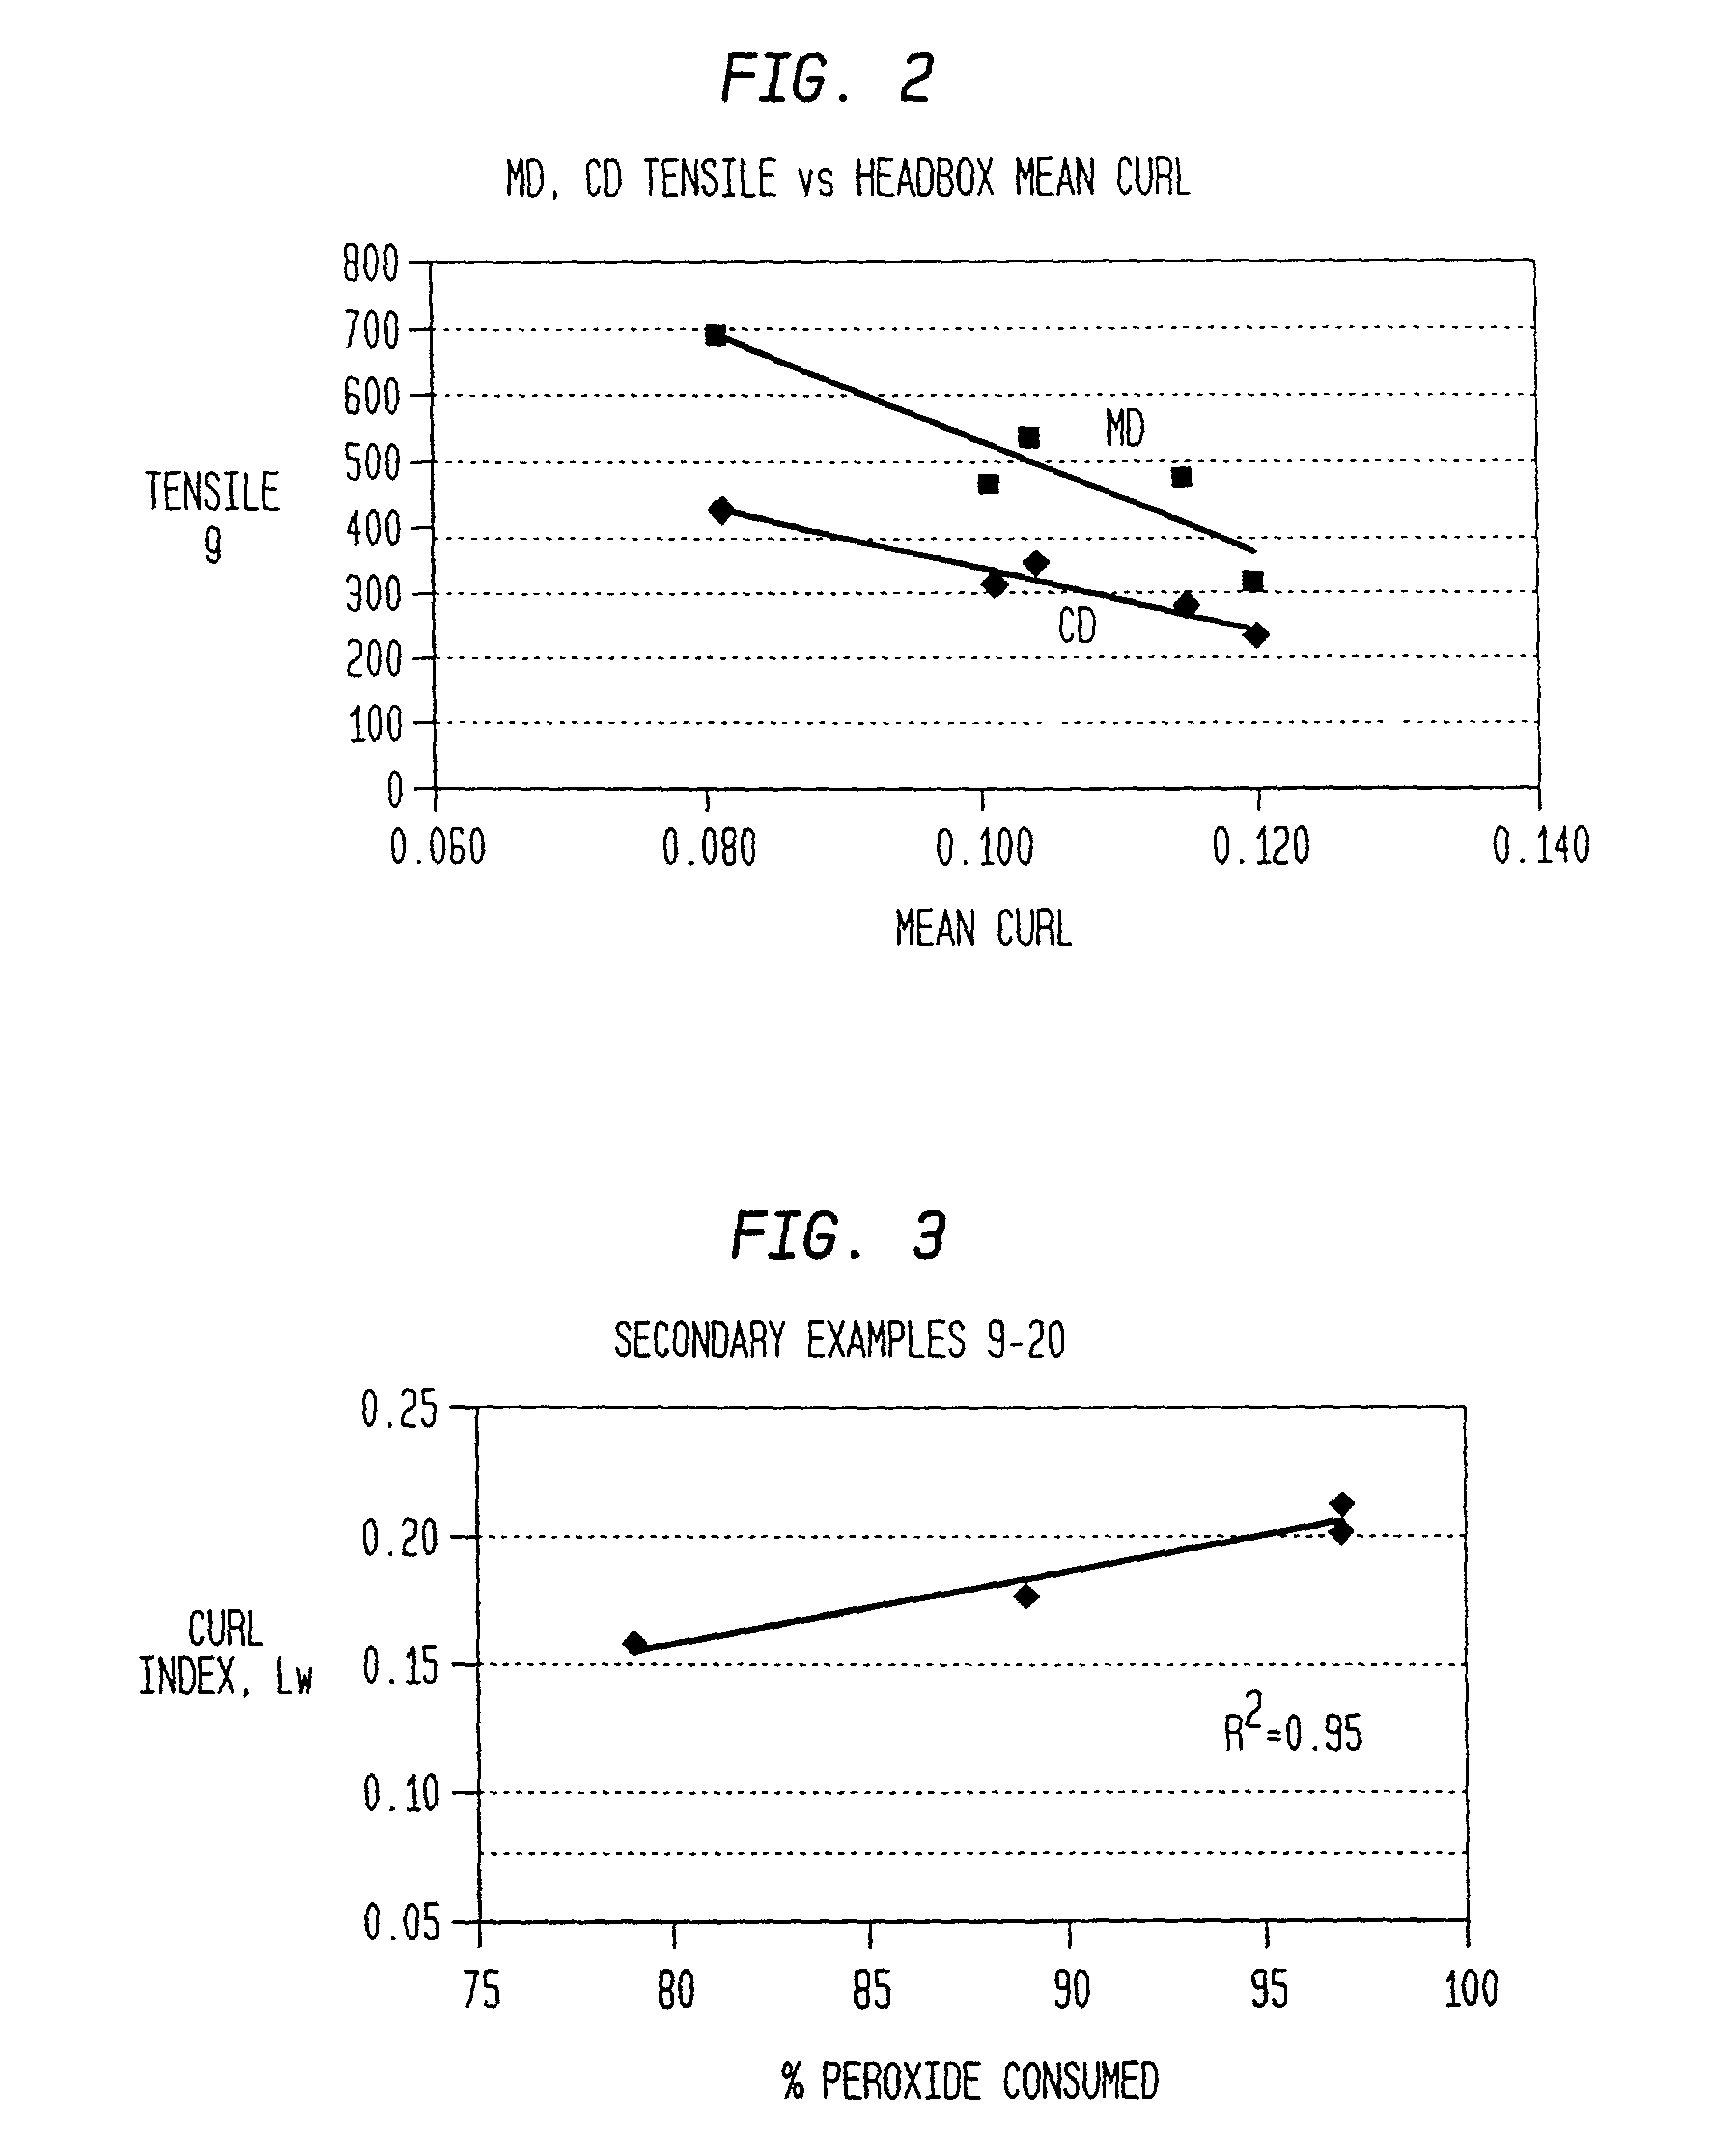 Method of bleaching and providing papermaking fibers with durable curl